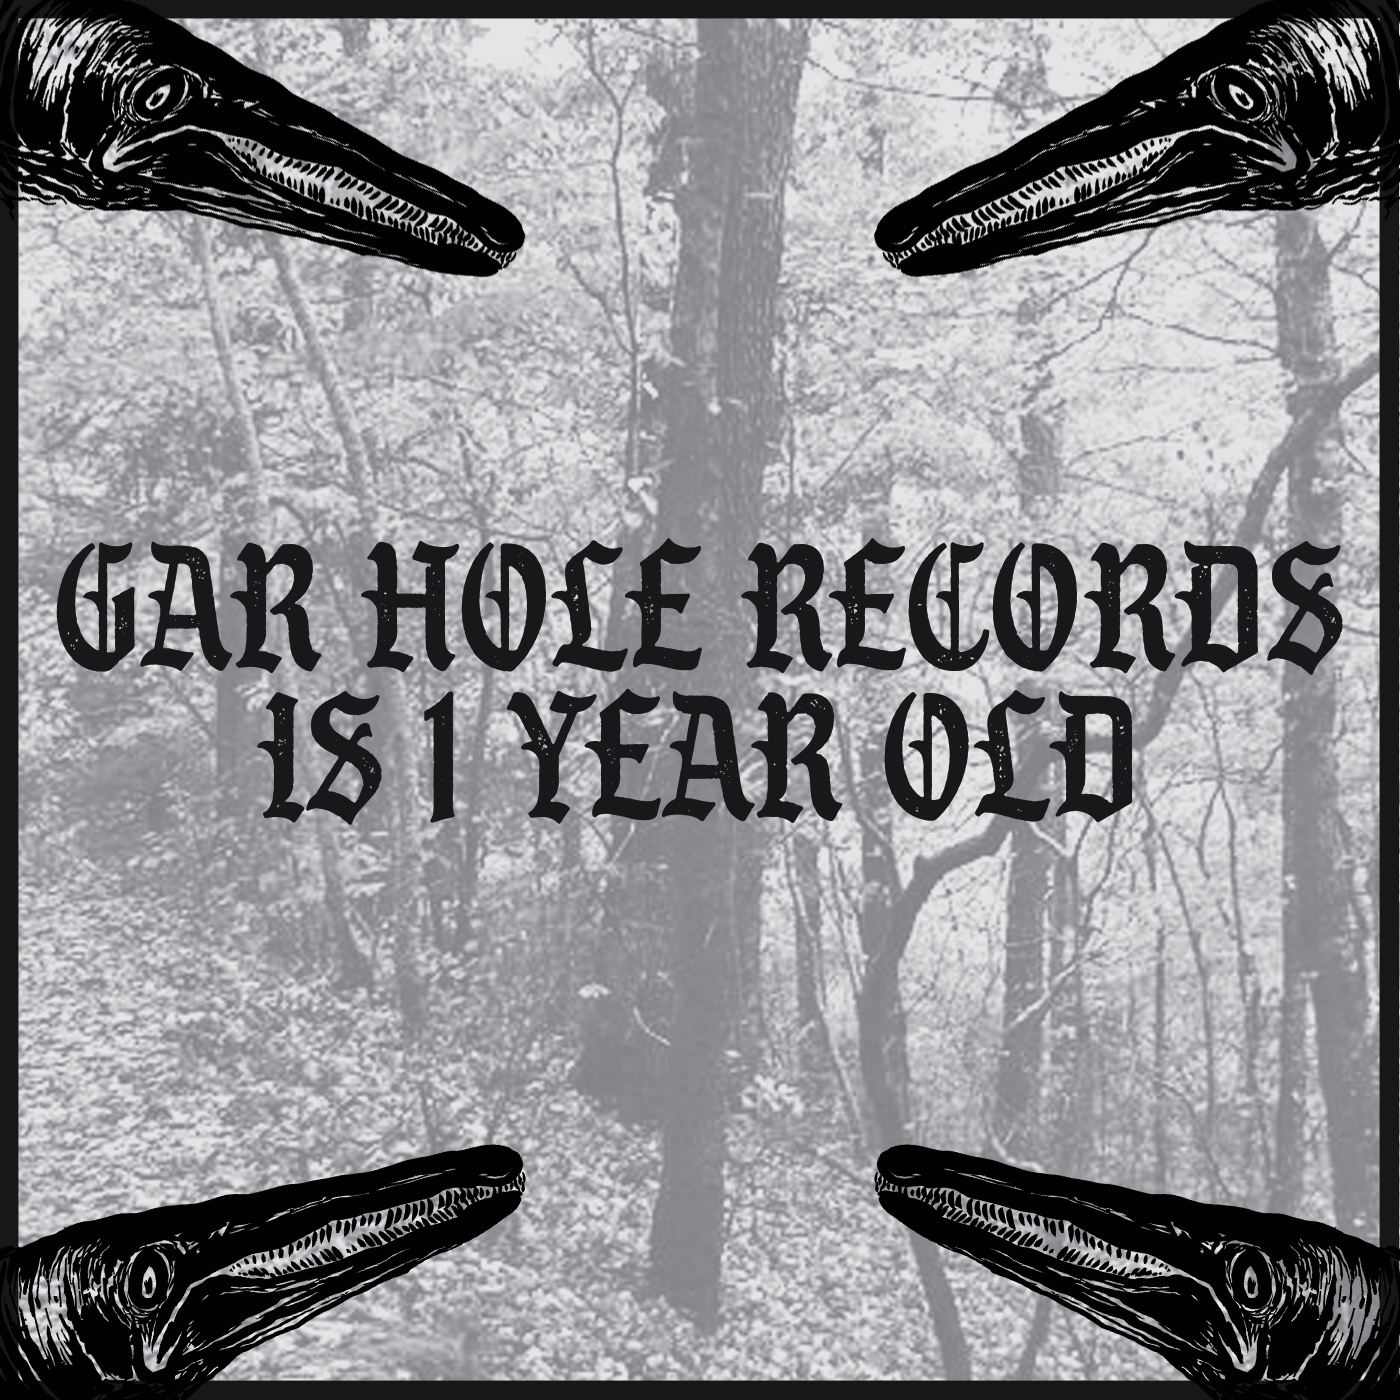 Gar Hole Records turns 1 Year Old